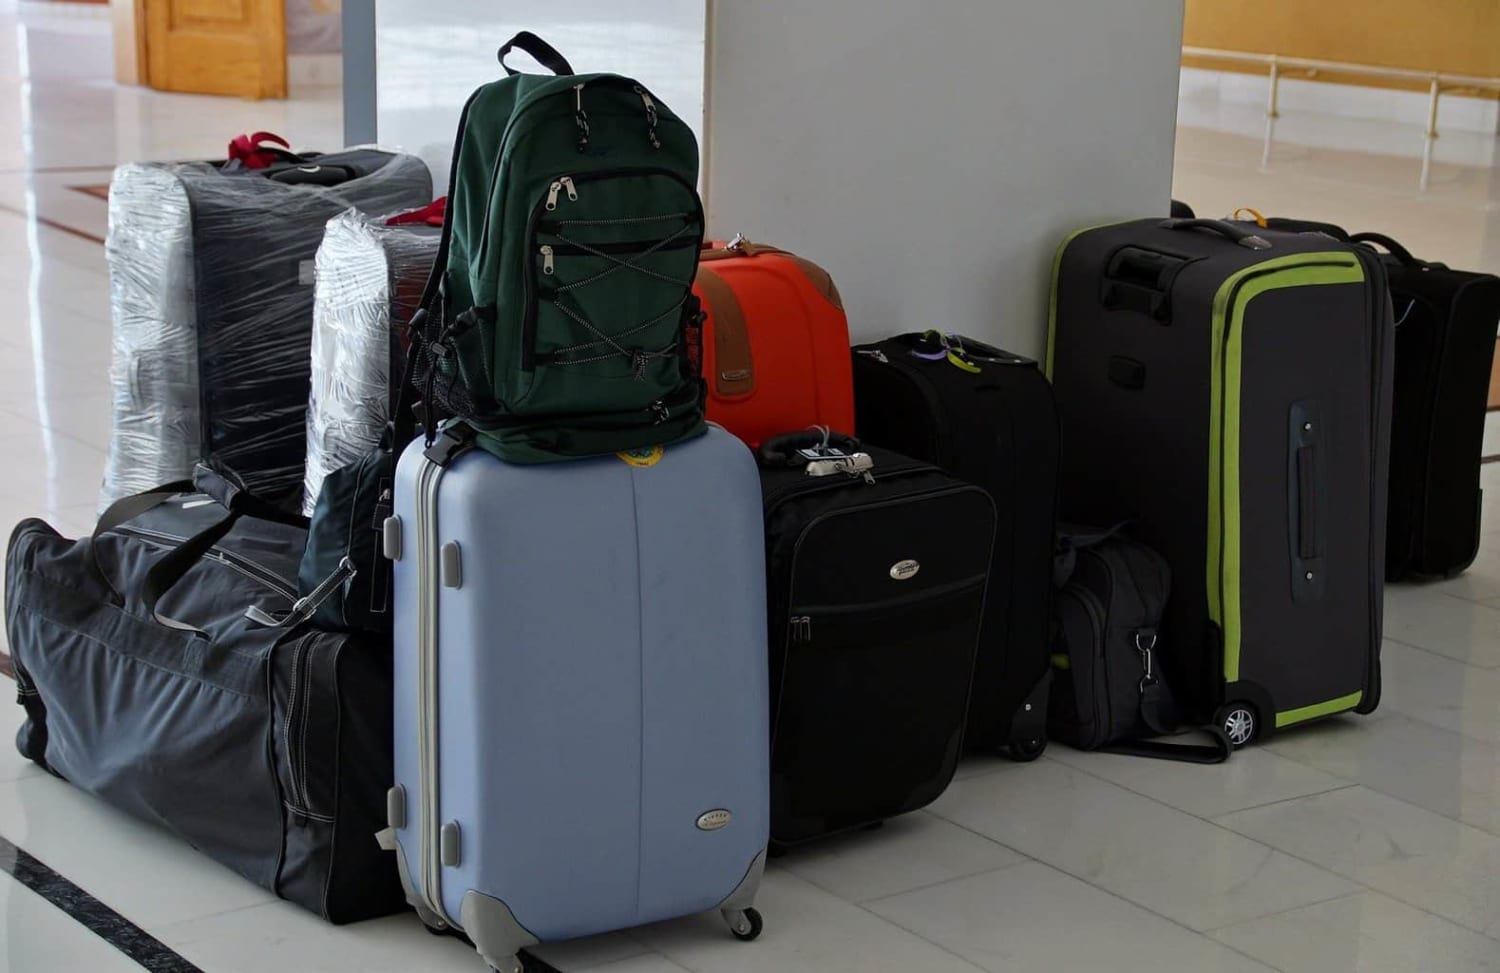 How to travel light but right regardless of where you travel to?